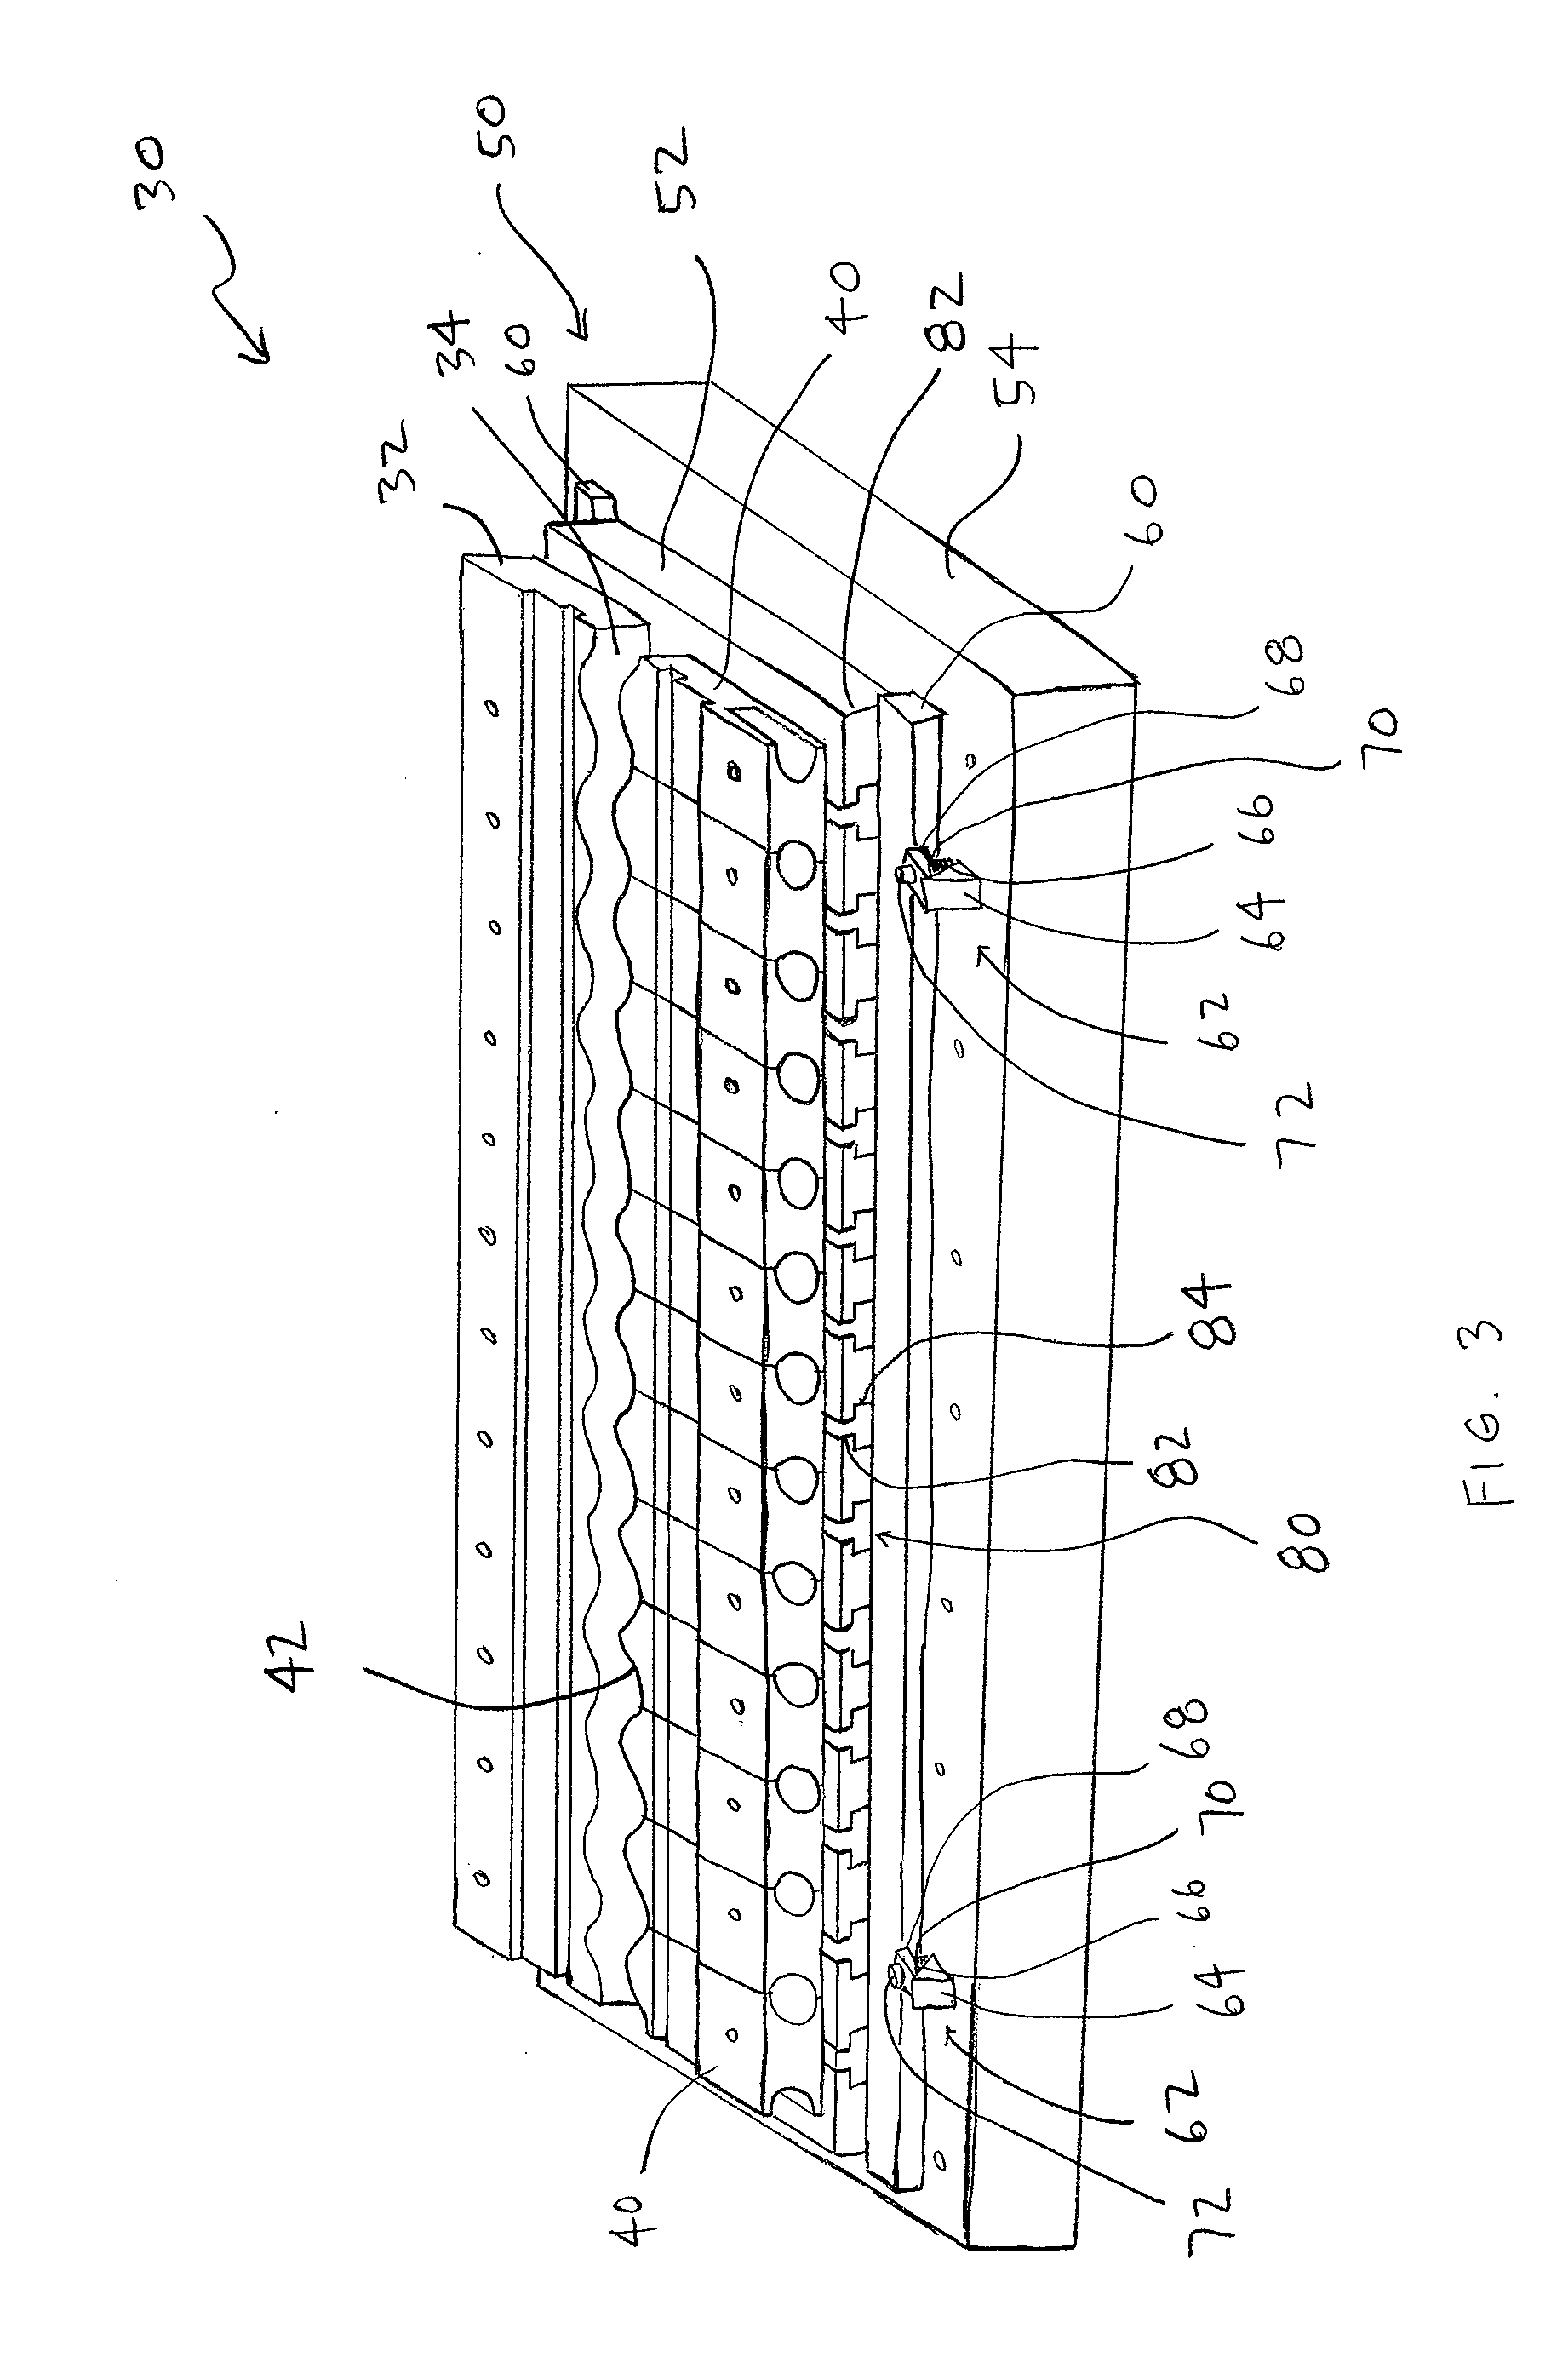 Apparatus and Method for Forming Corrugated Members